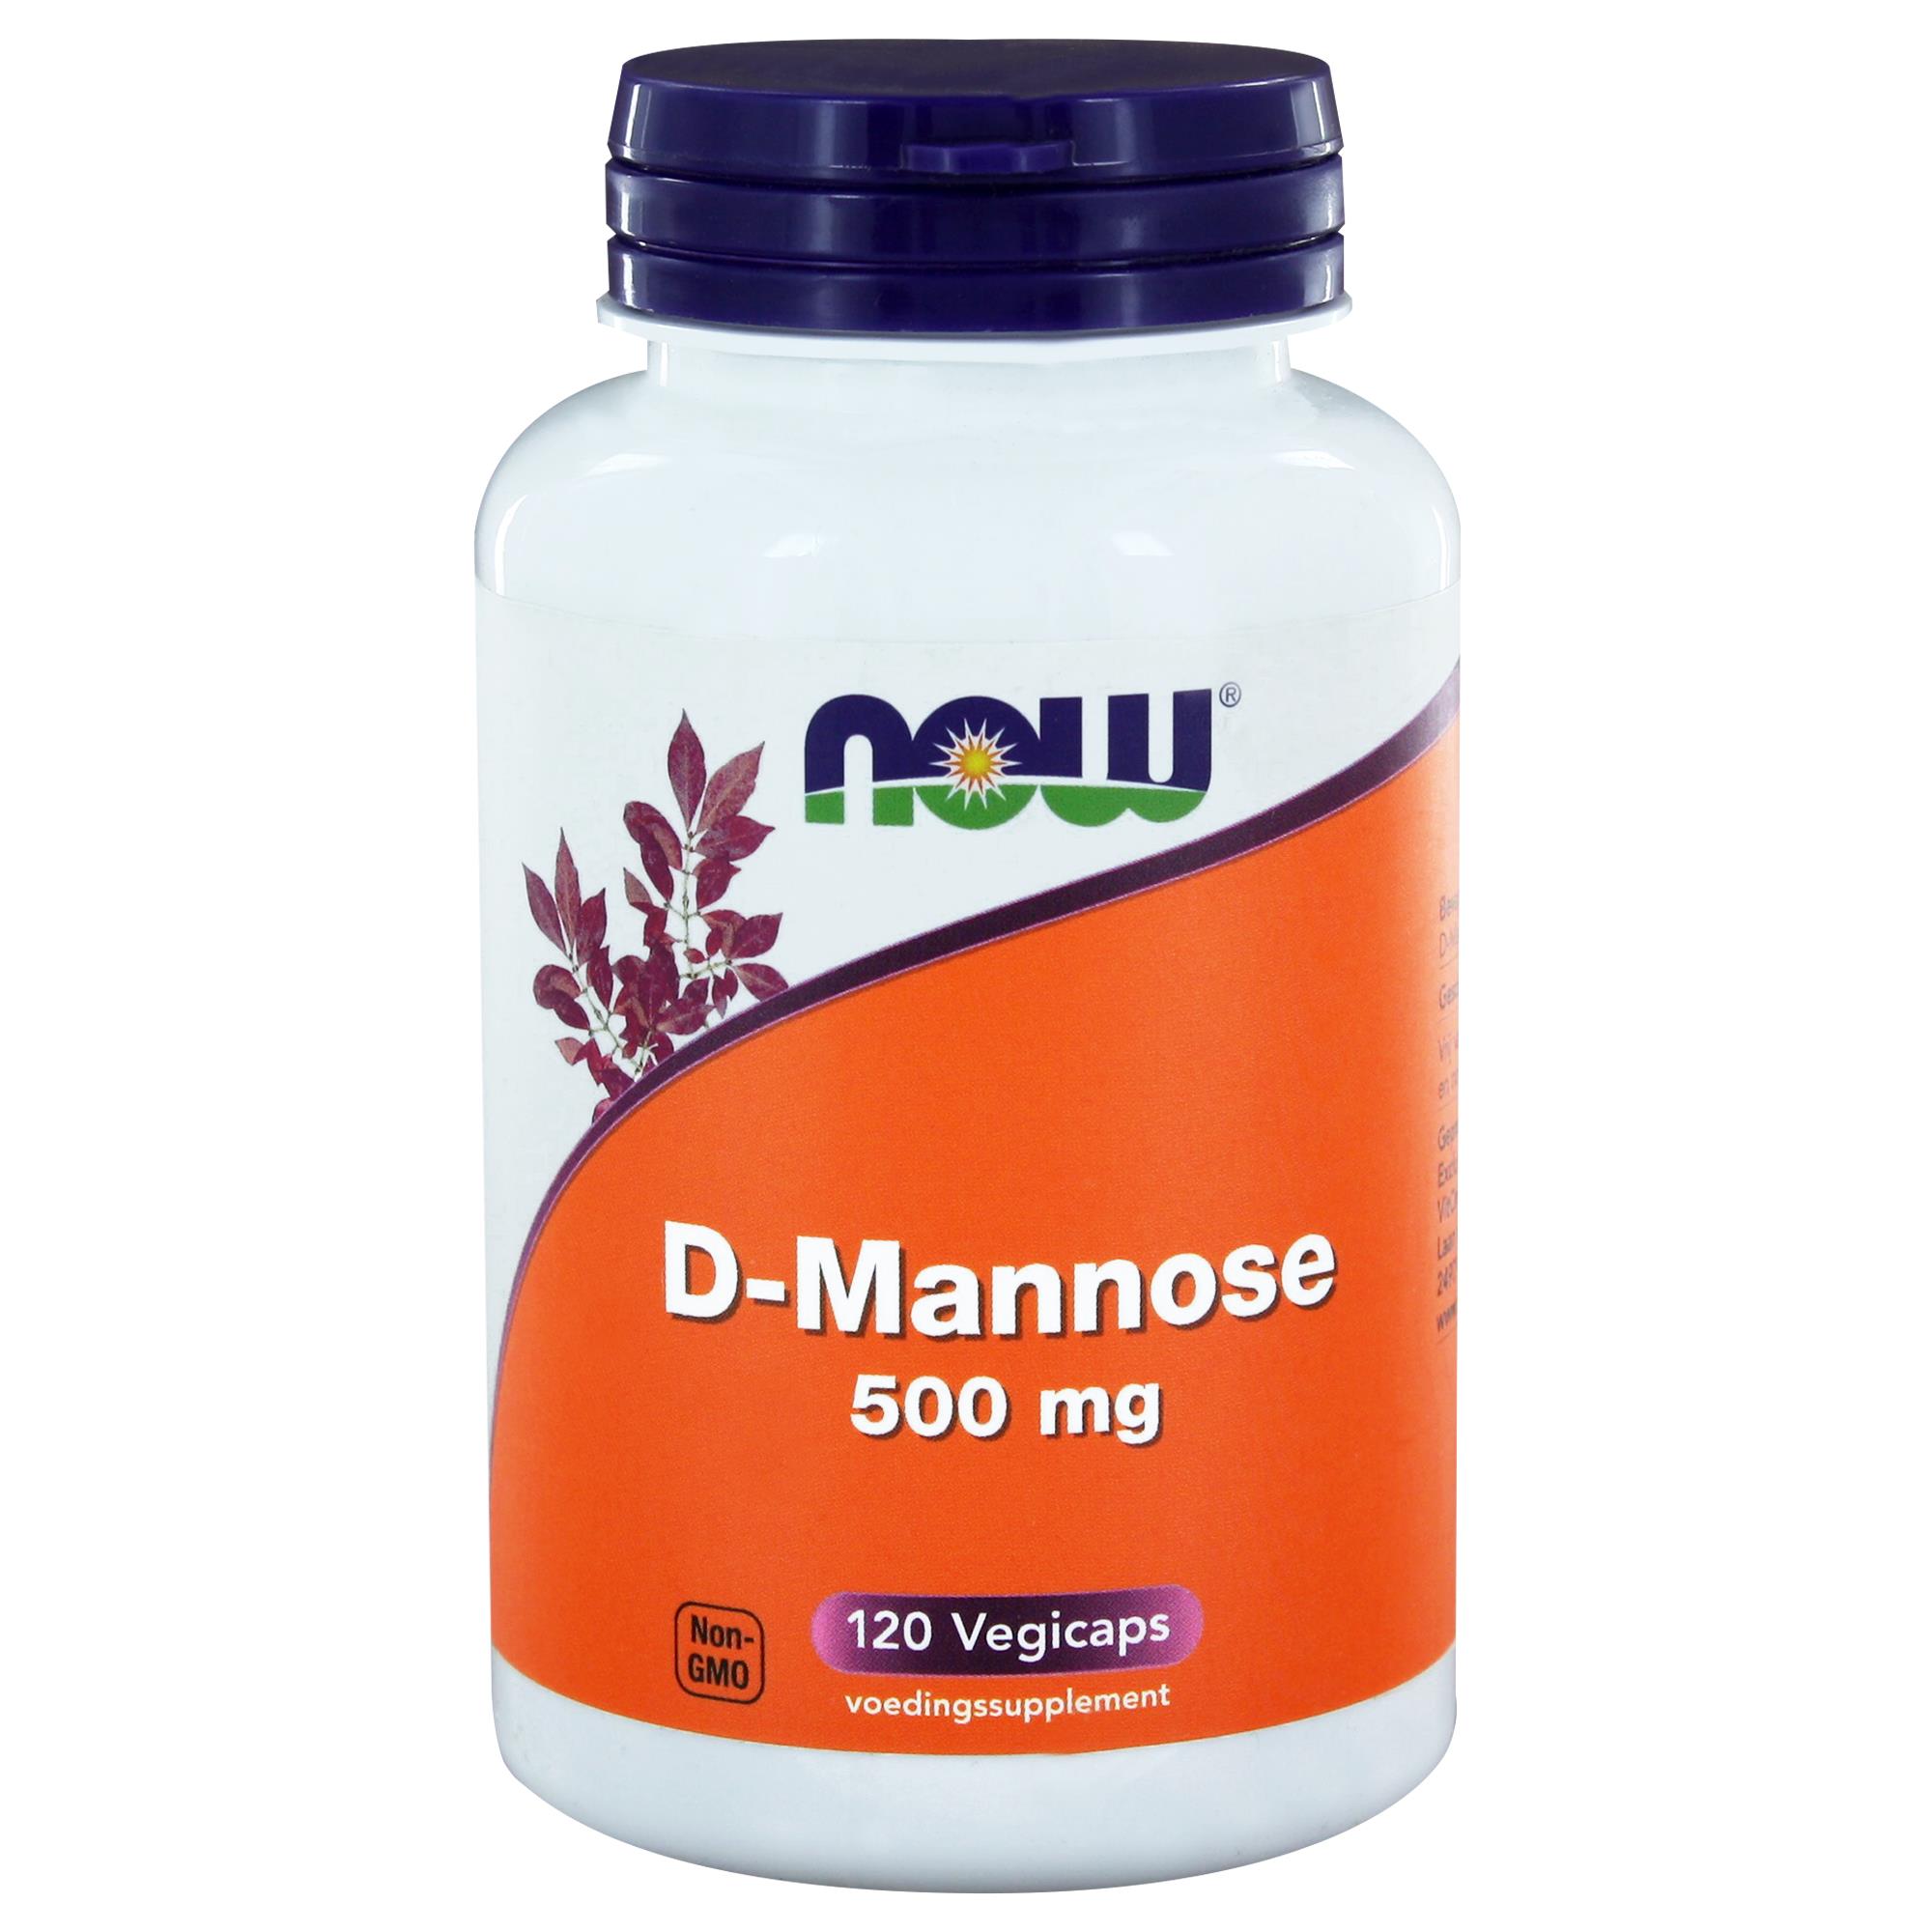 D-Mannose 500 mg 120 Vcaps